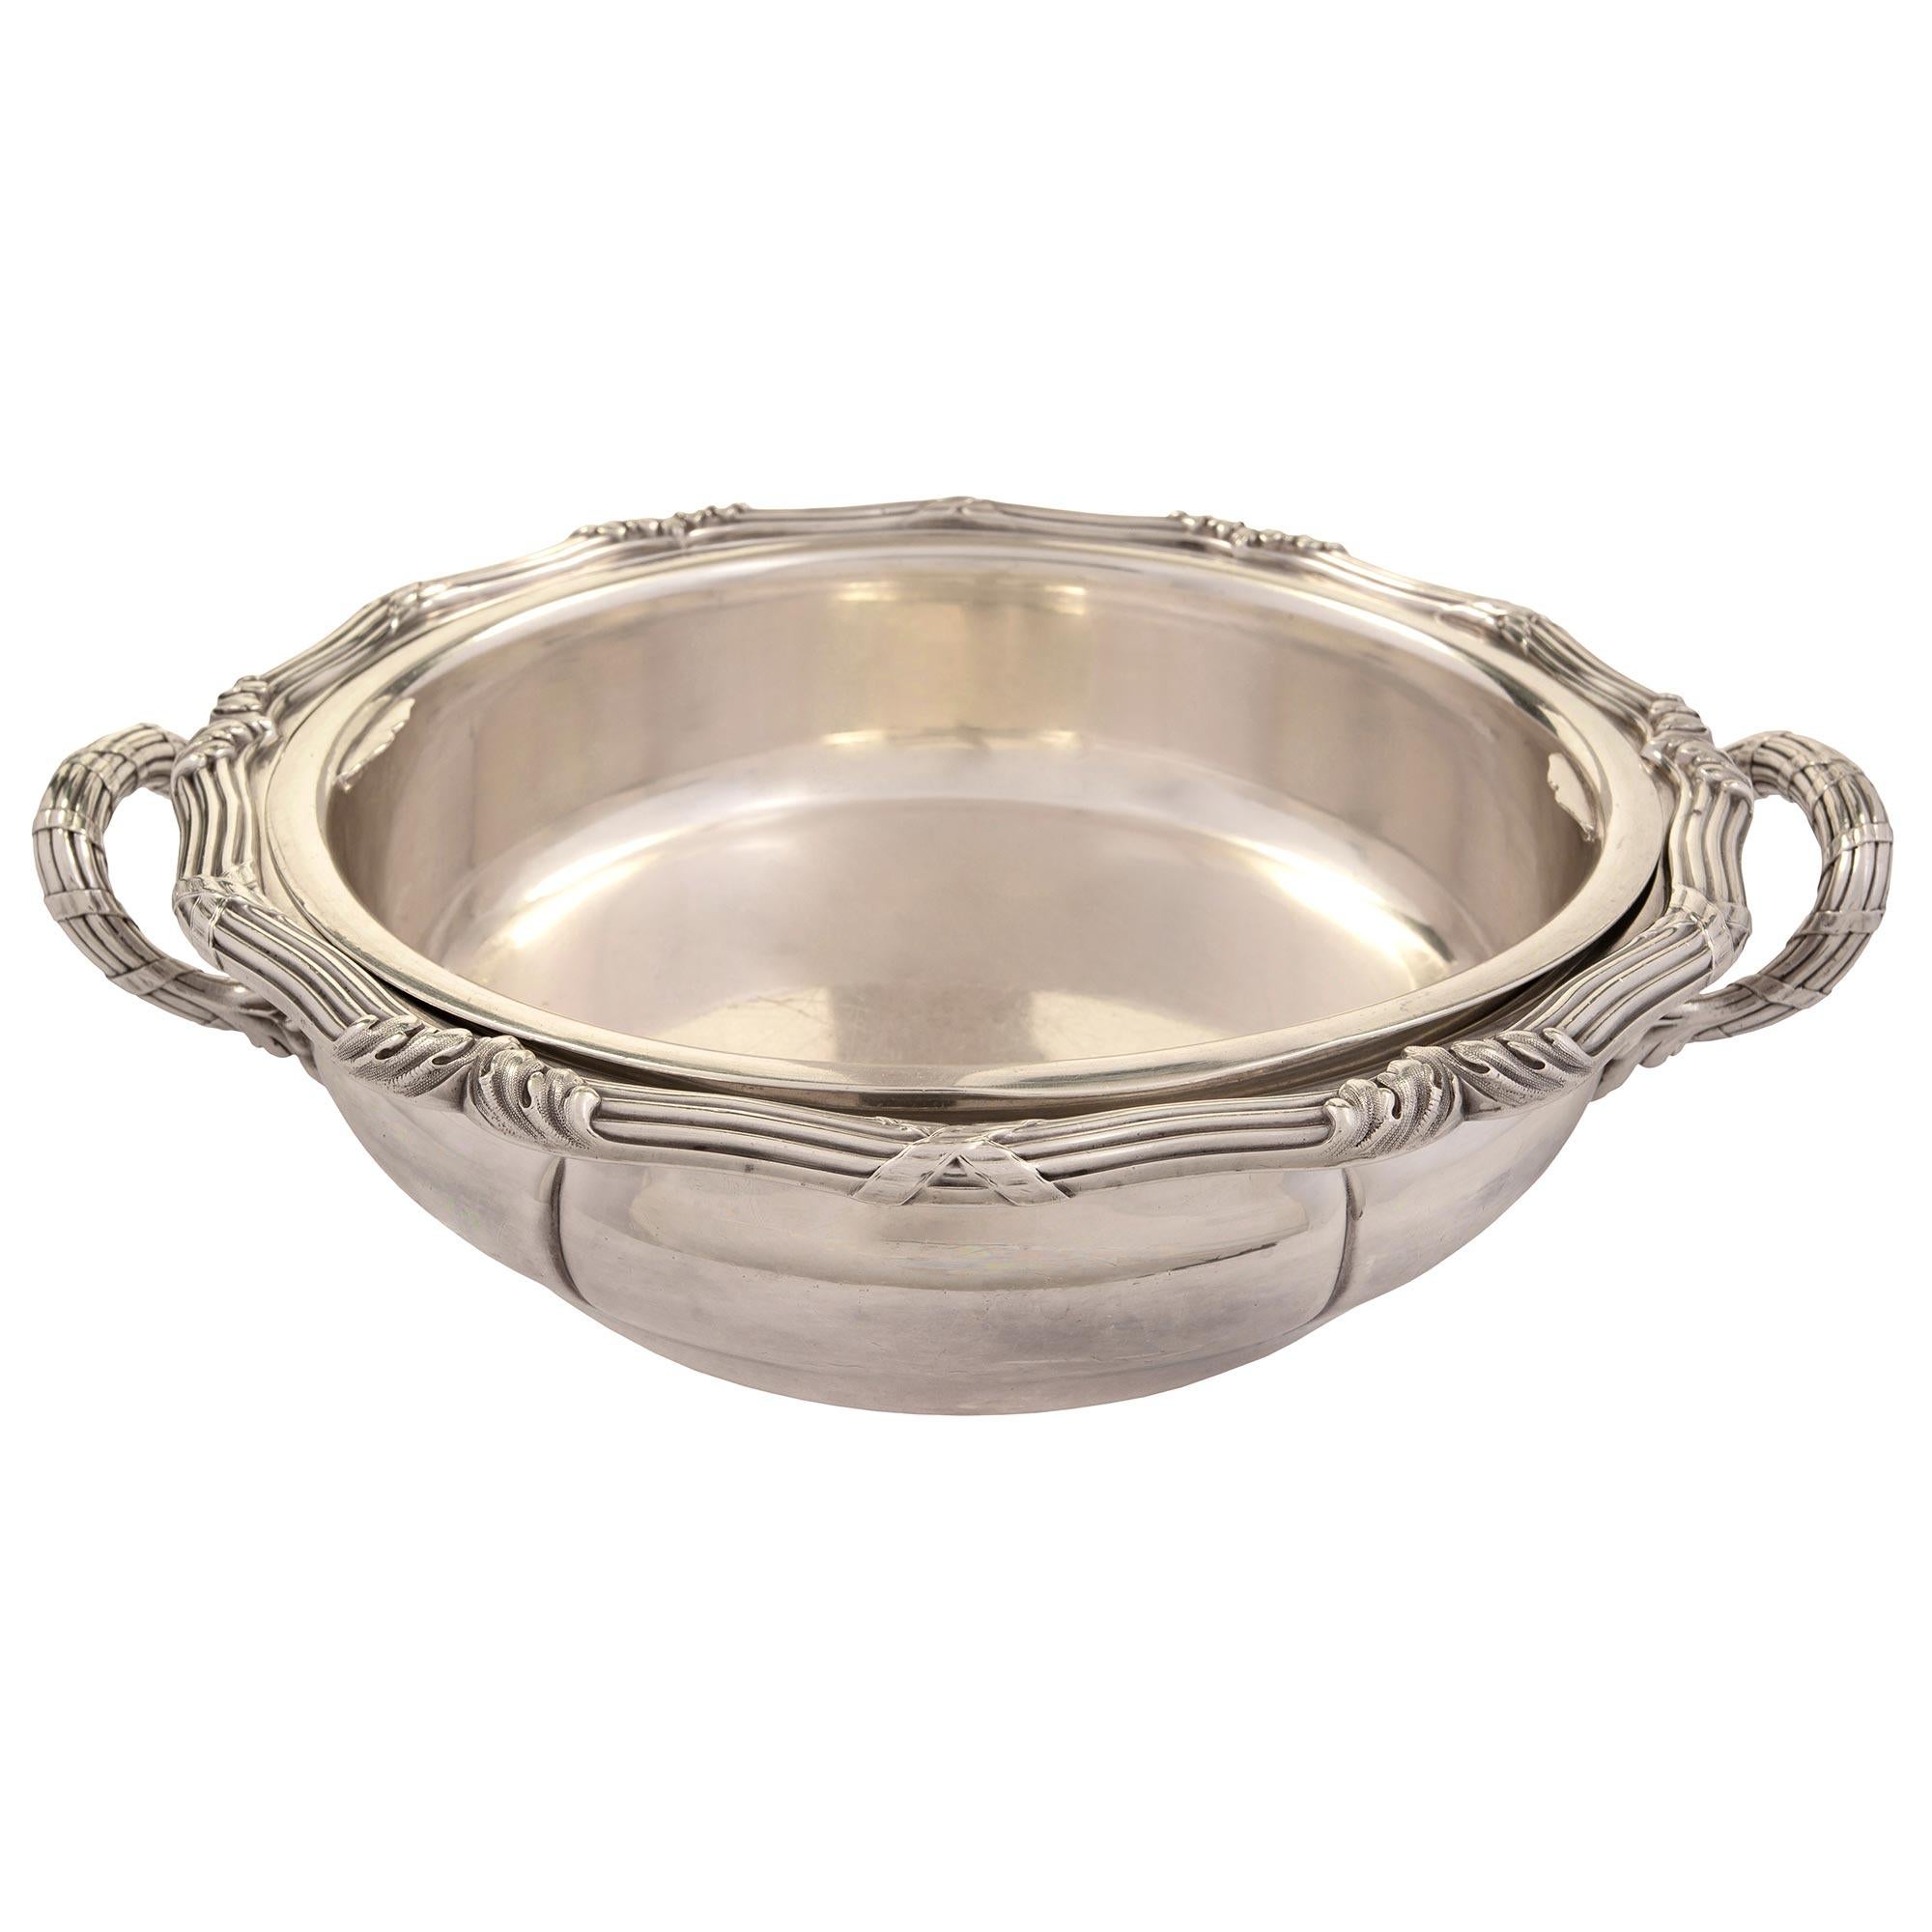 A fine French 19th century Louis XV st. Sterling silver tureen from Maison Odiot, stamped PR - Maison ODIOT PRÉVOST & Cie. 1449 with its original fitted insert. The tureen displays a most charming and decorative shape with tied reeded handles at